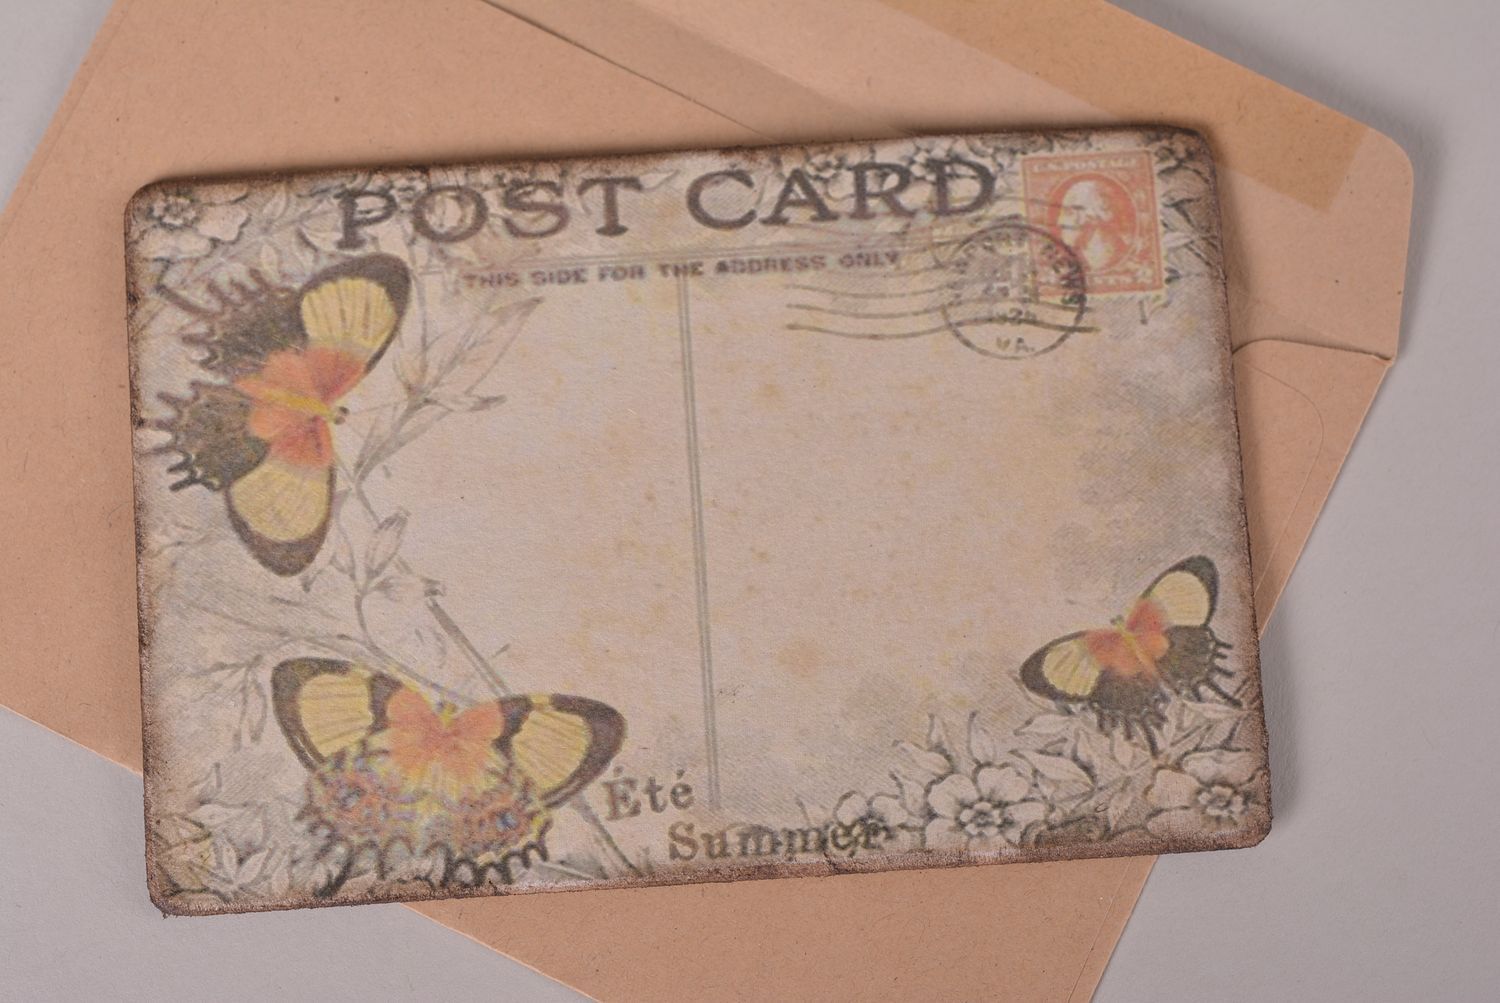 Unusual handmade greeting card vintage post card birthday gift ideas small gifts photo 2